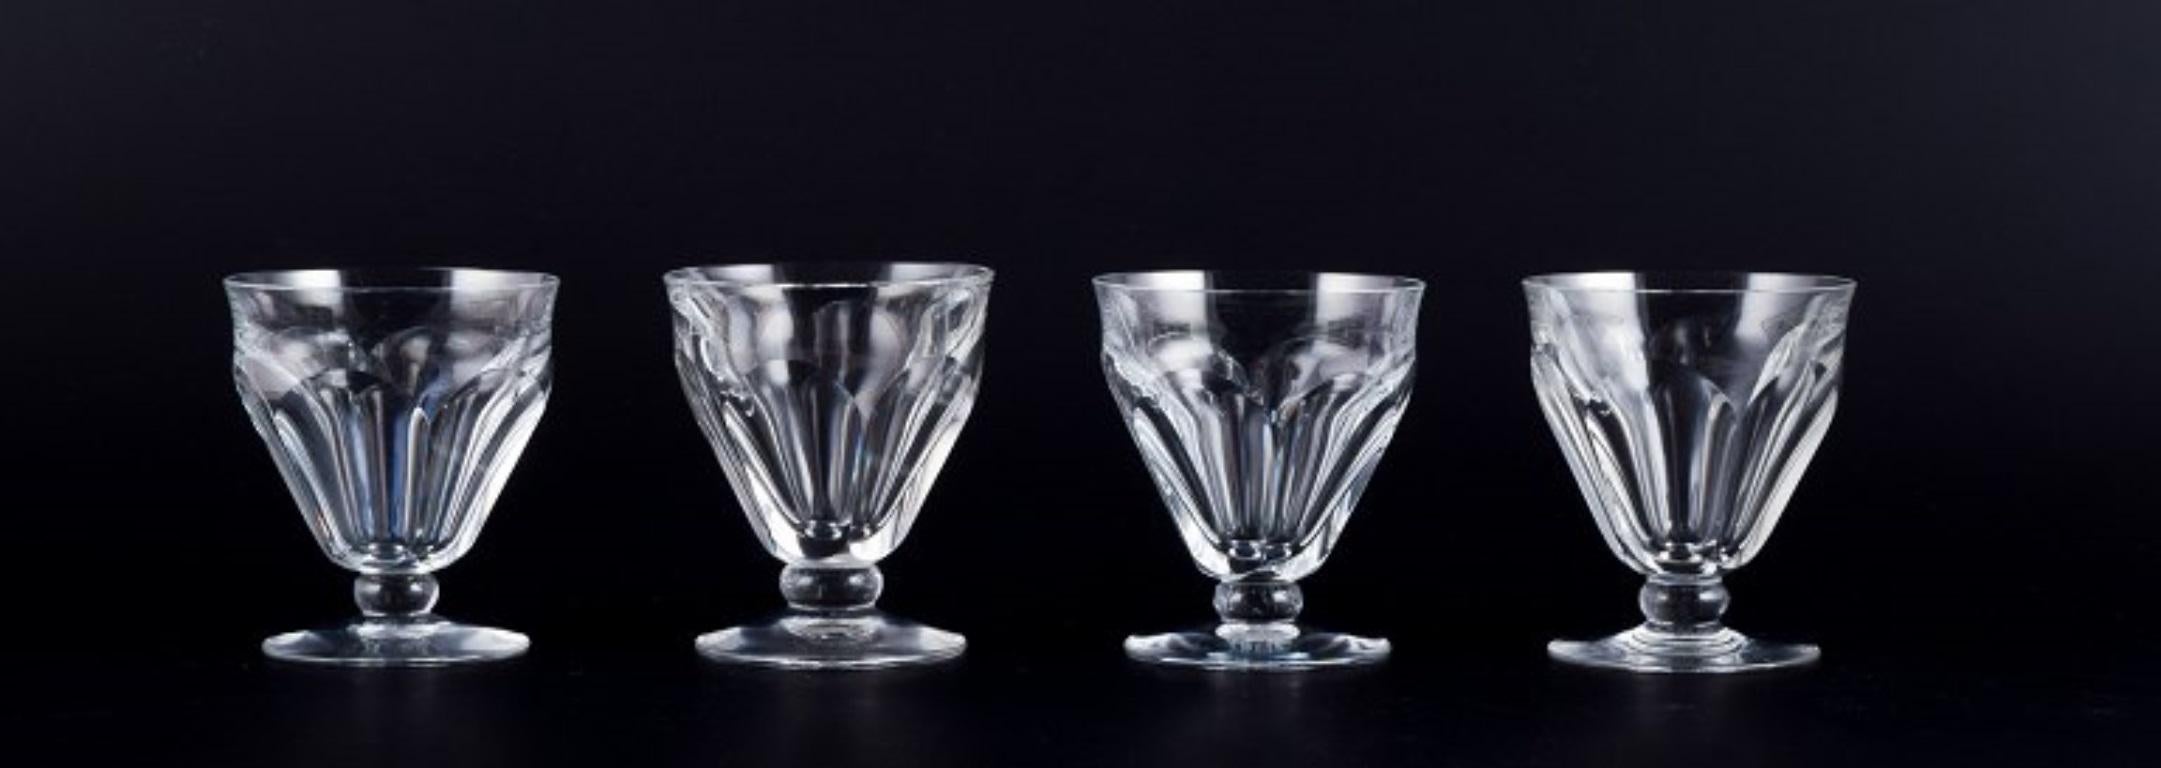 Baccarat, France. A set of four Art Deco white wine glasses in faceted cut crystal glass. 
1930s/1940s.
Marked.
Perfect condition.
Dimensions: D 7.5 cm x H 8.5 cm.

